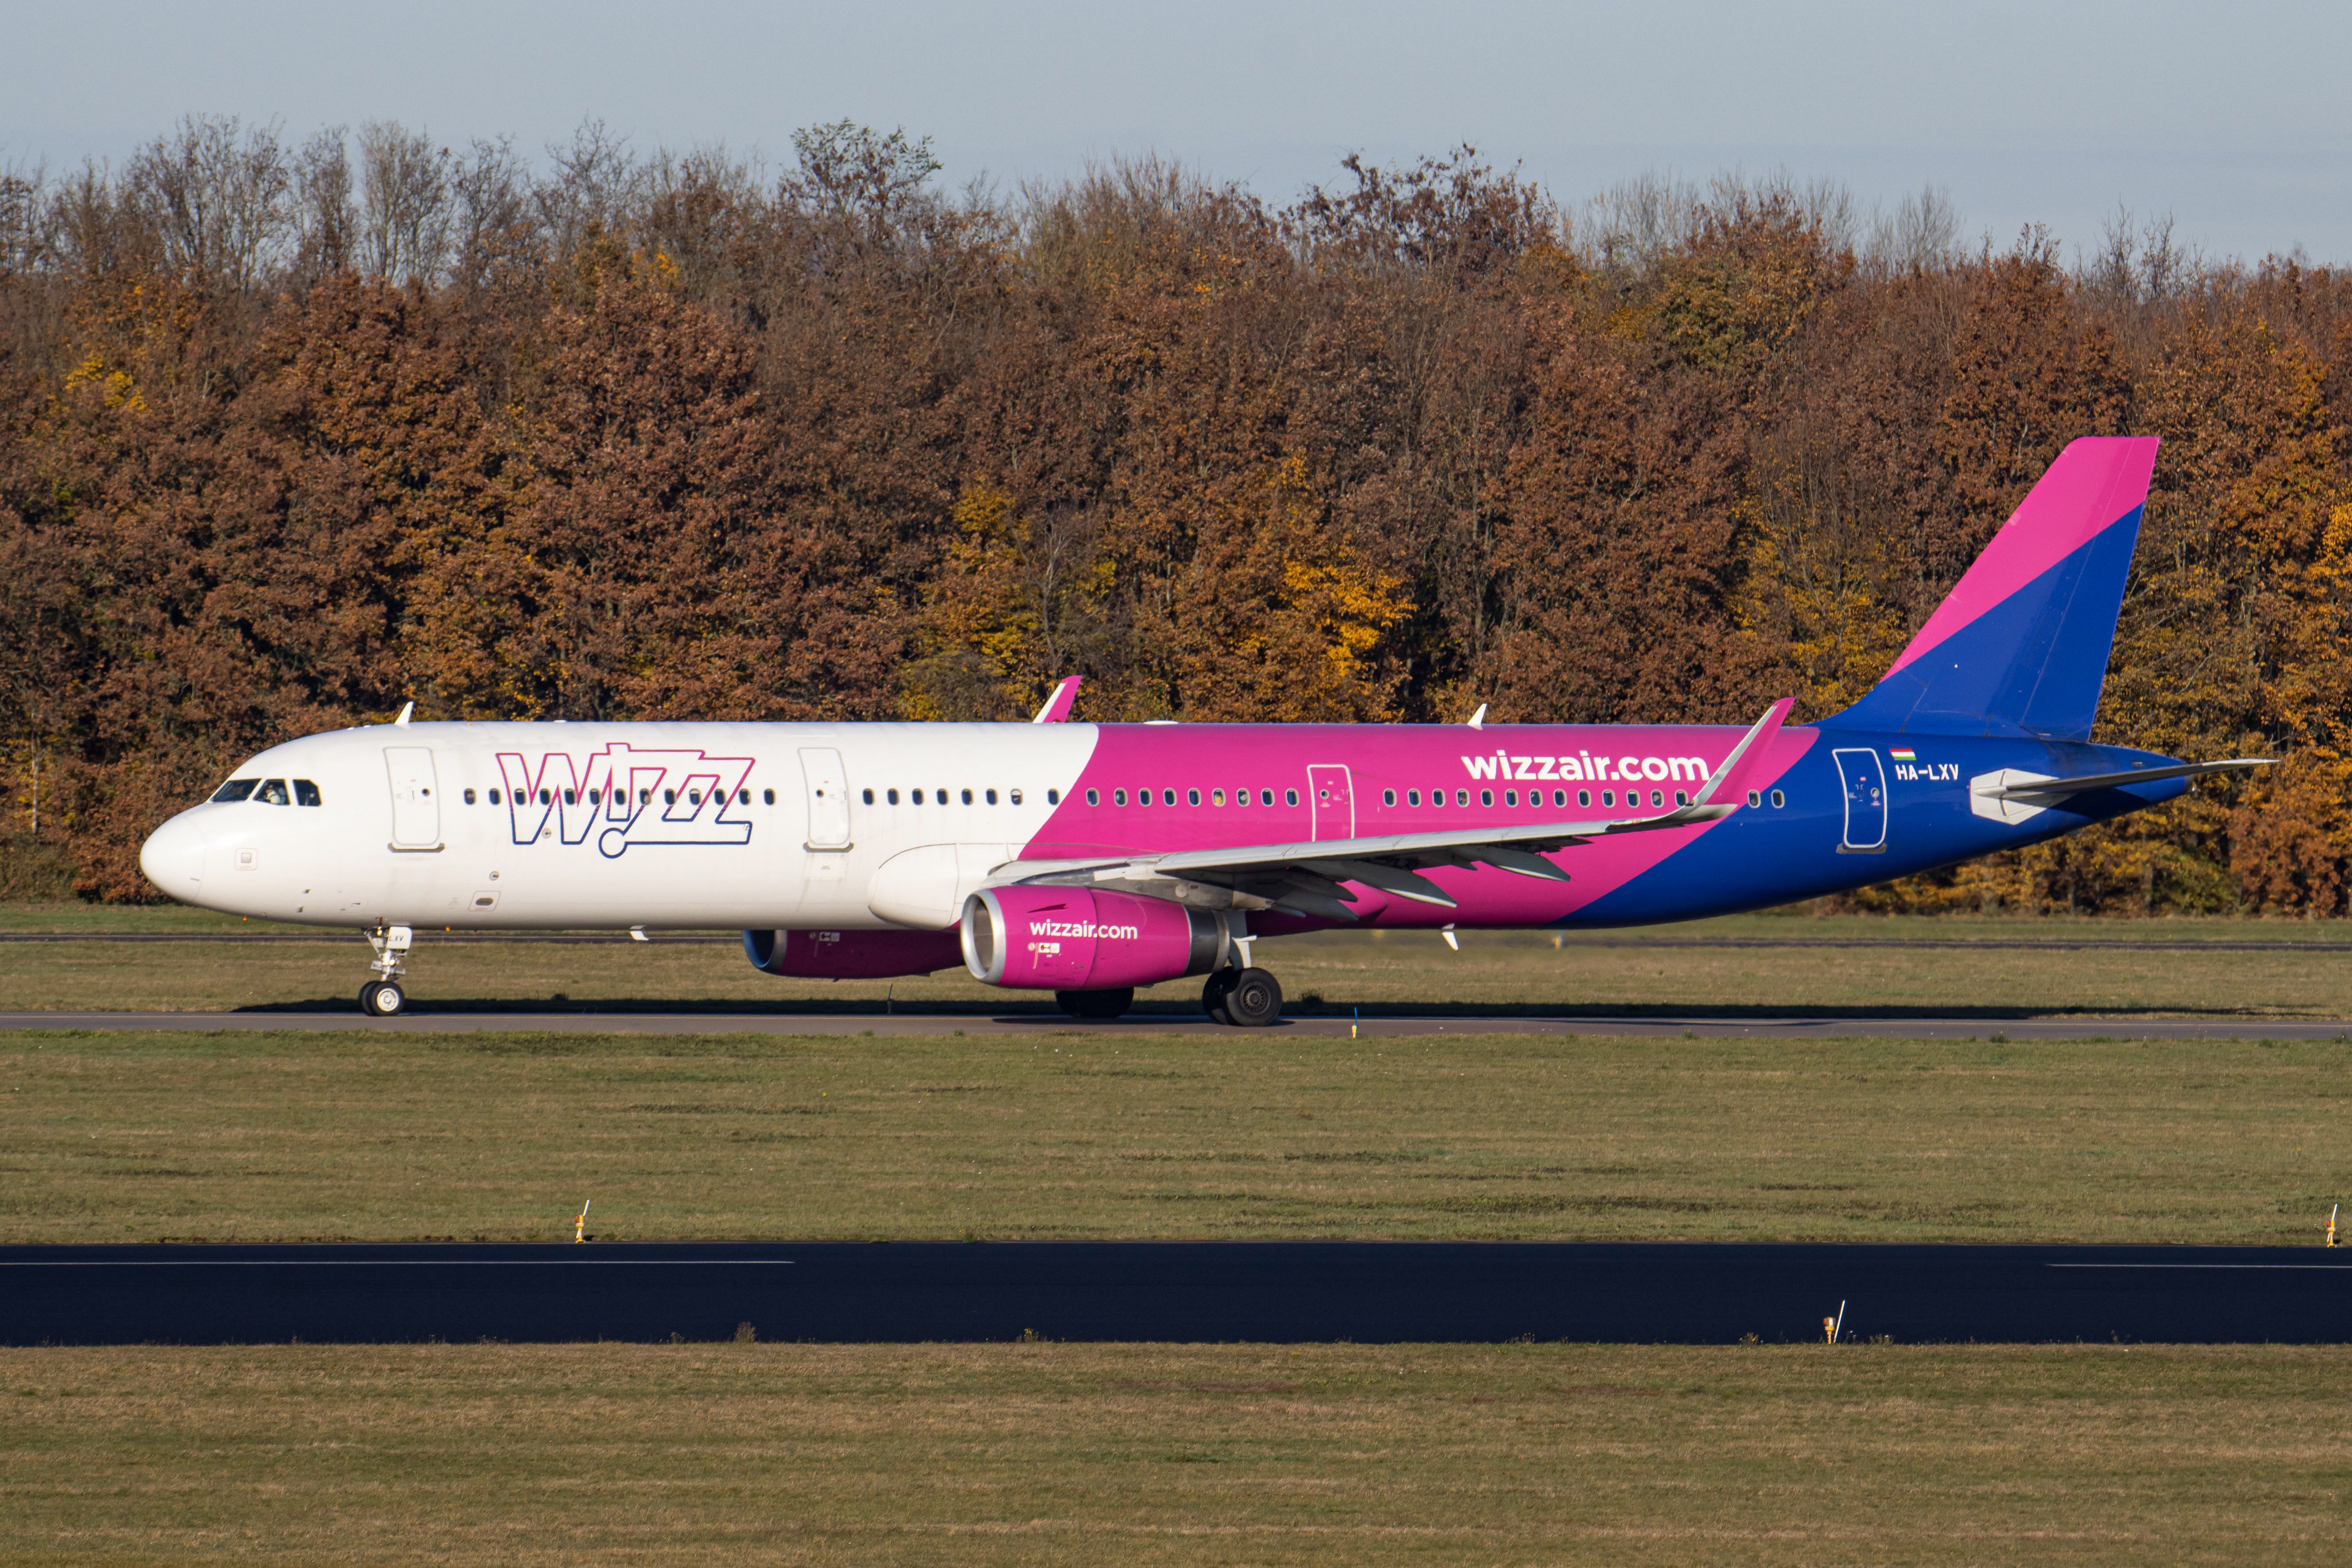 Wizz Air aircraft in front of trees